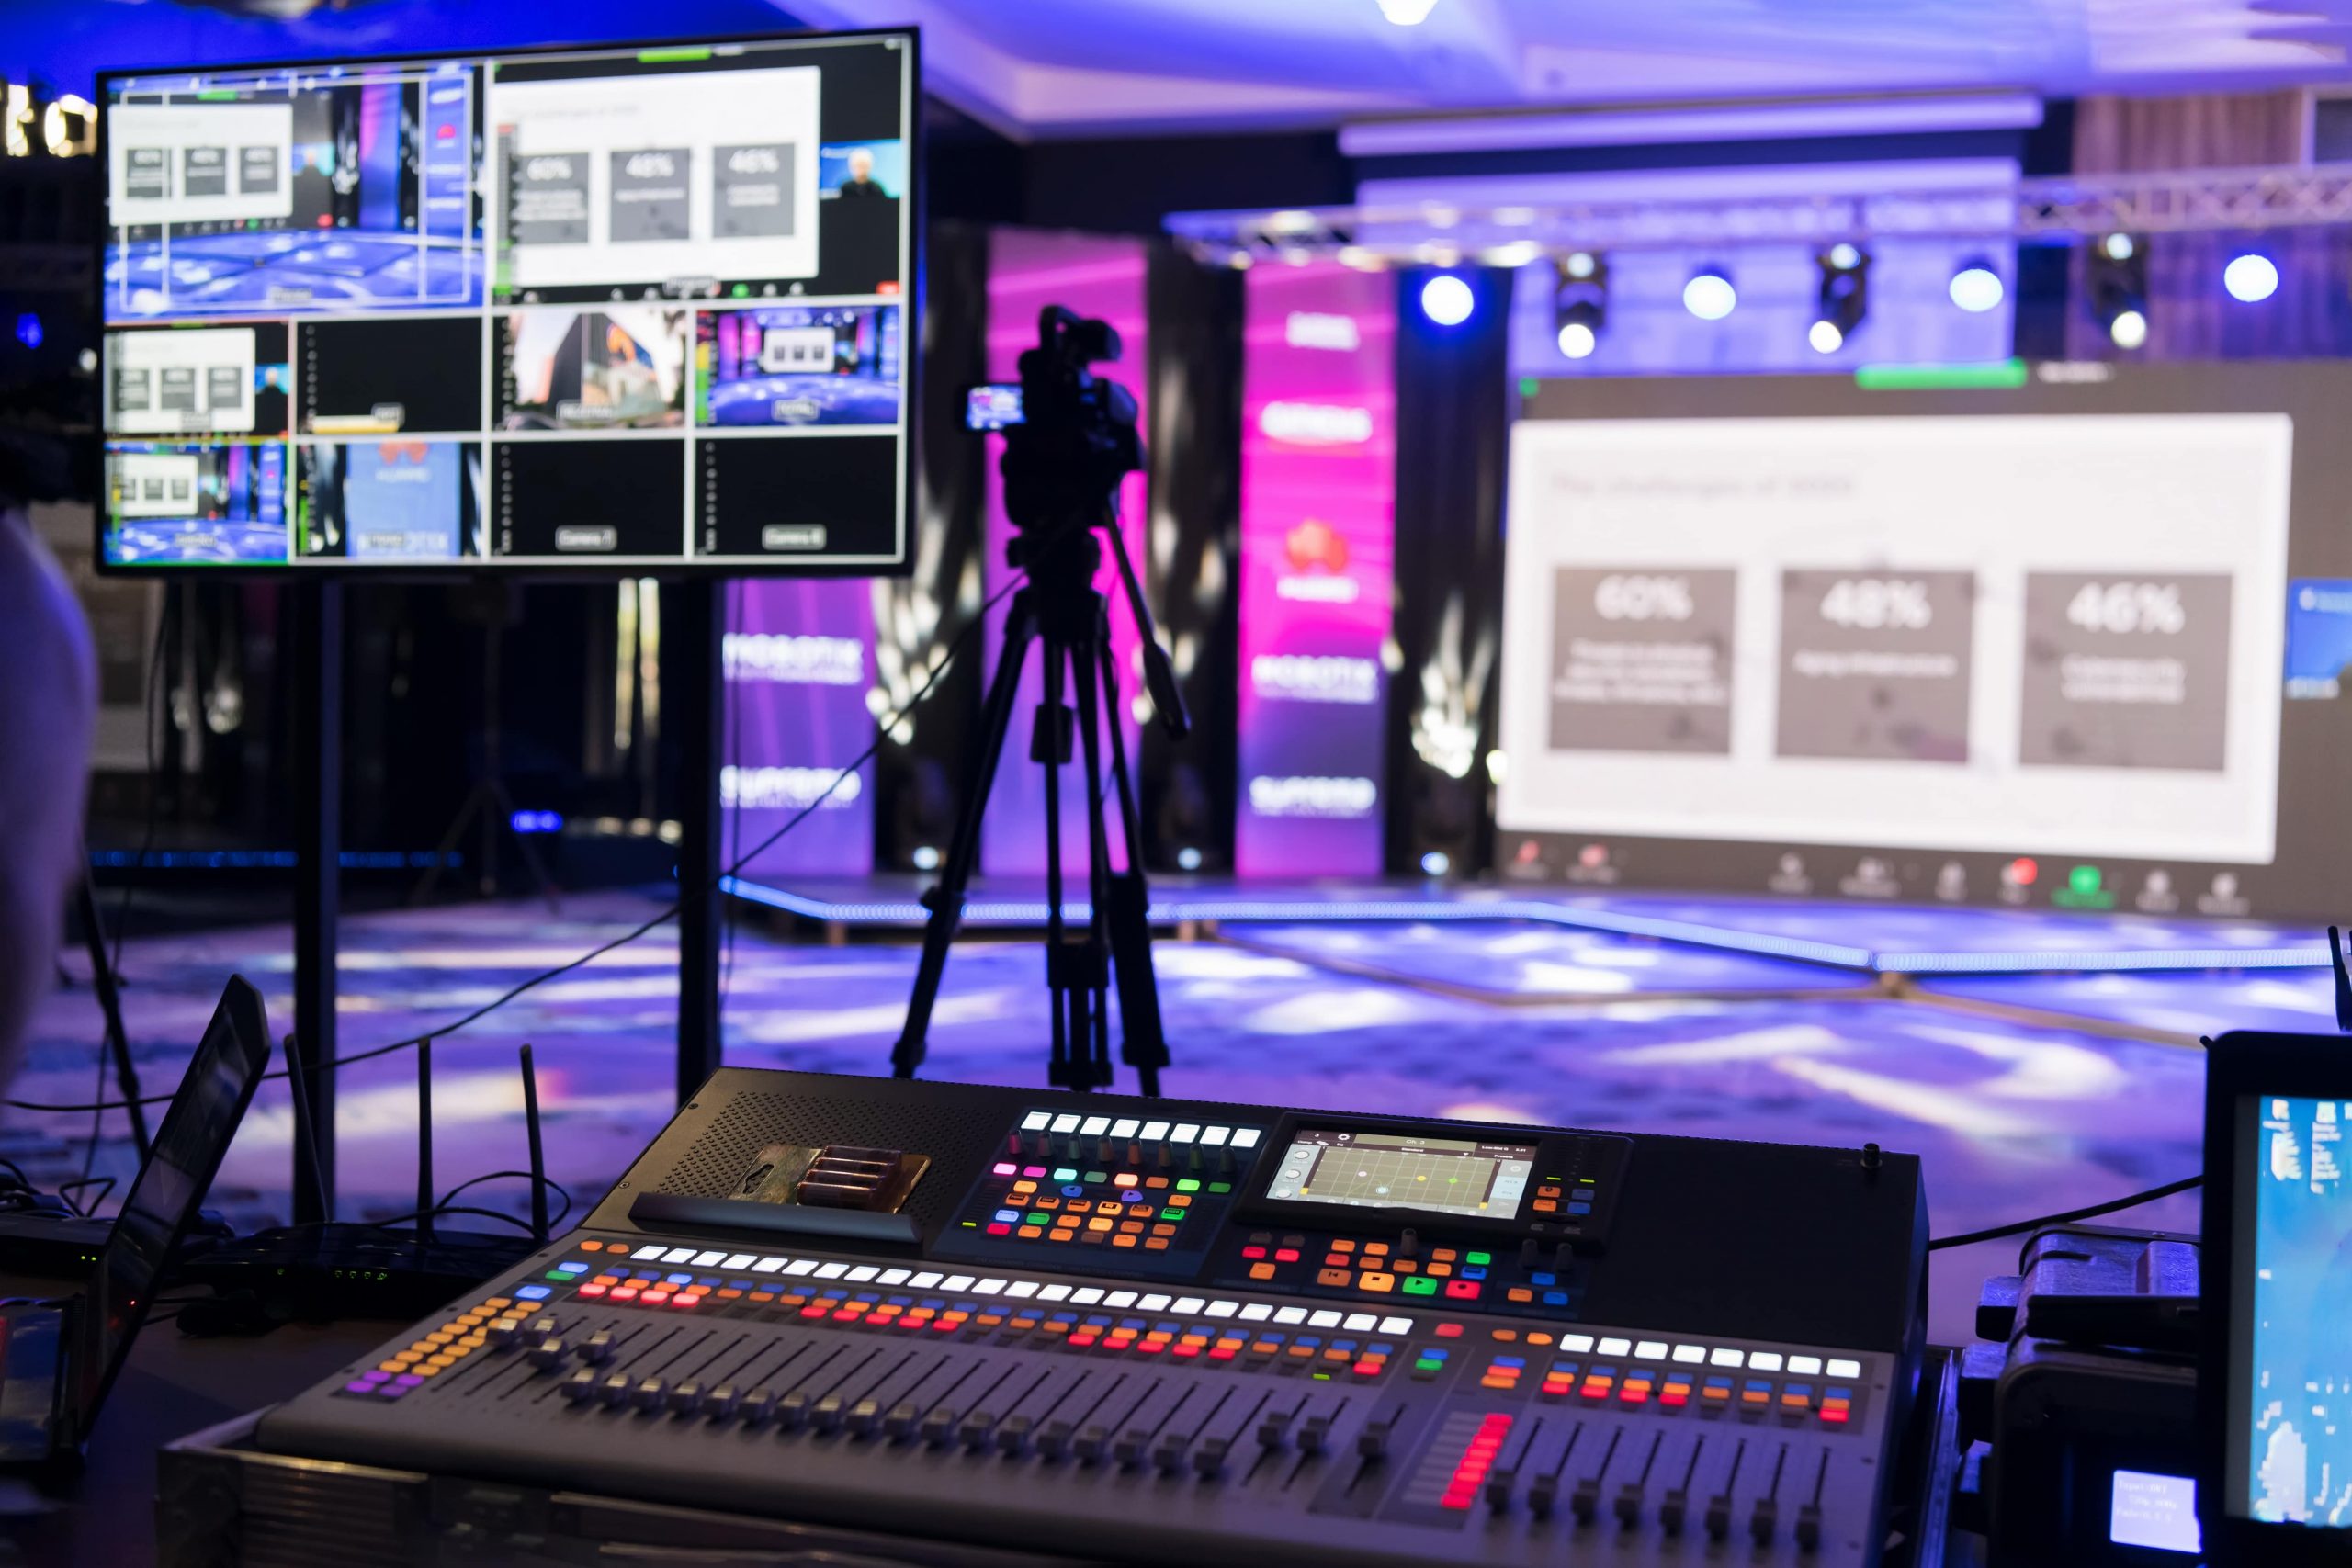 ShowEquip covers the Corporate Events sector / industry. Image of a broadcast set-up including video mixing multi view output along with audio mixer.